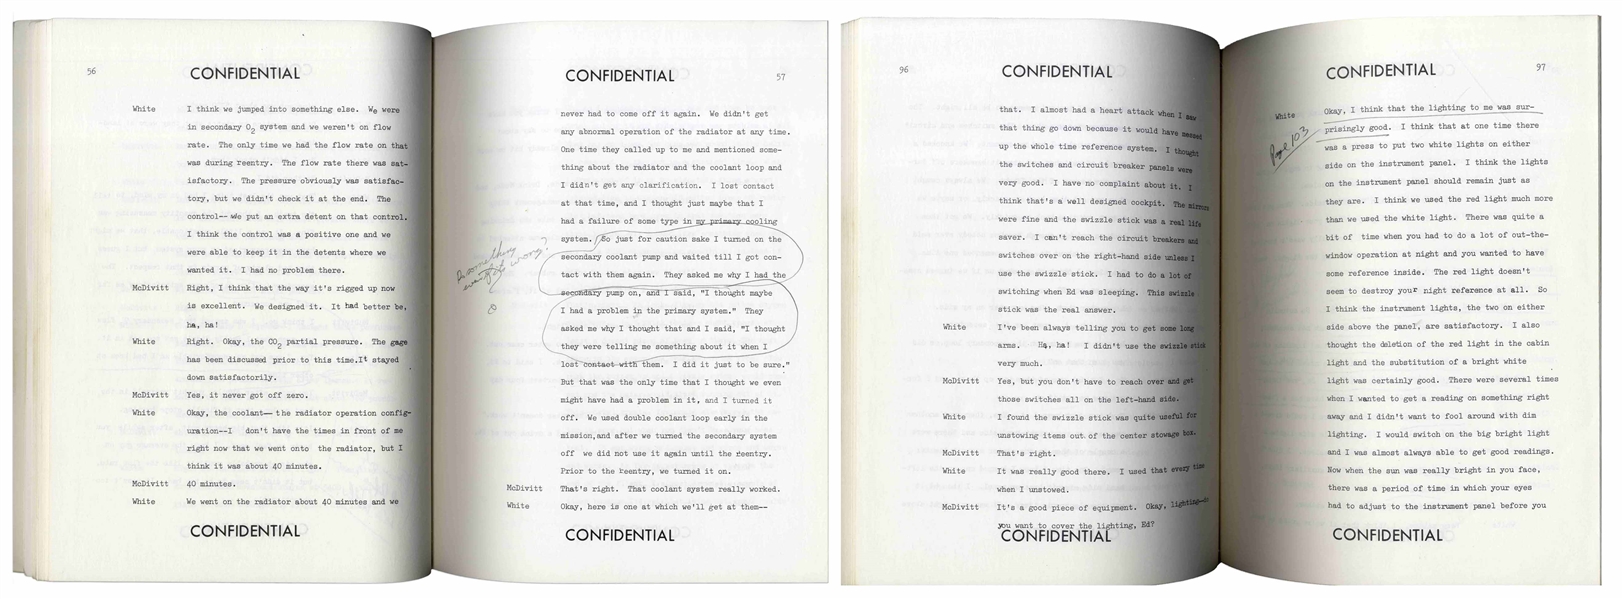 Gus Grissom Personally Owned Lot of 9 NASA Books Including Grissom's Heavily Edited Gemini 4 Debriefing Report: ''Kick his ass!!'' and ''Did they have a moon on dark side?'' -- With Zarelli COAs